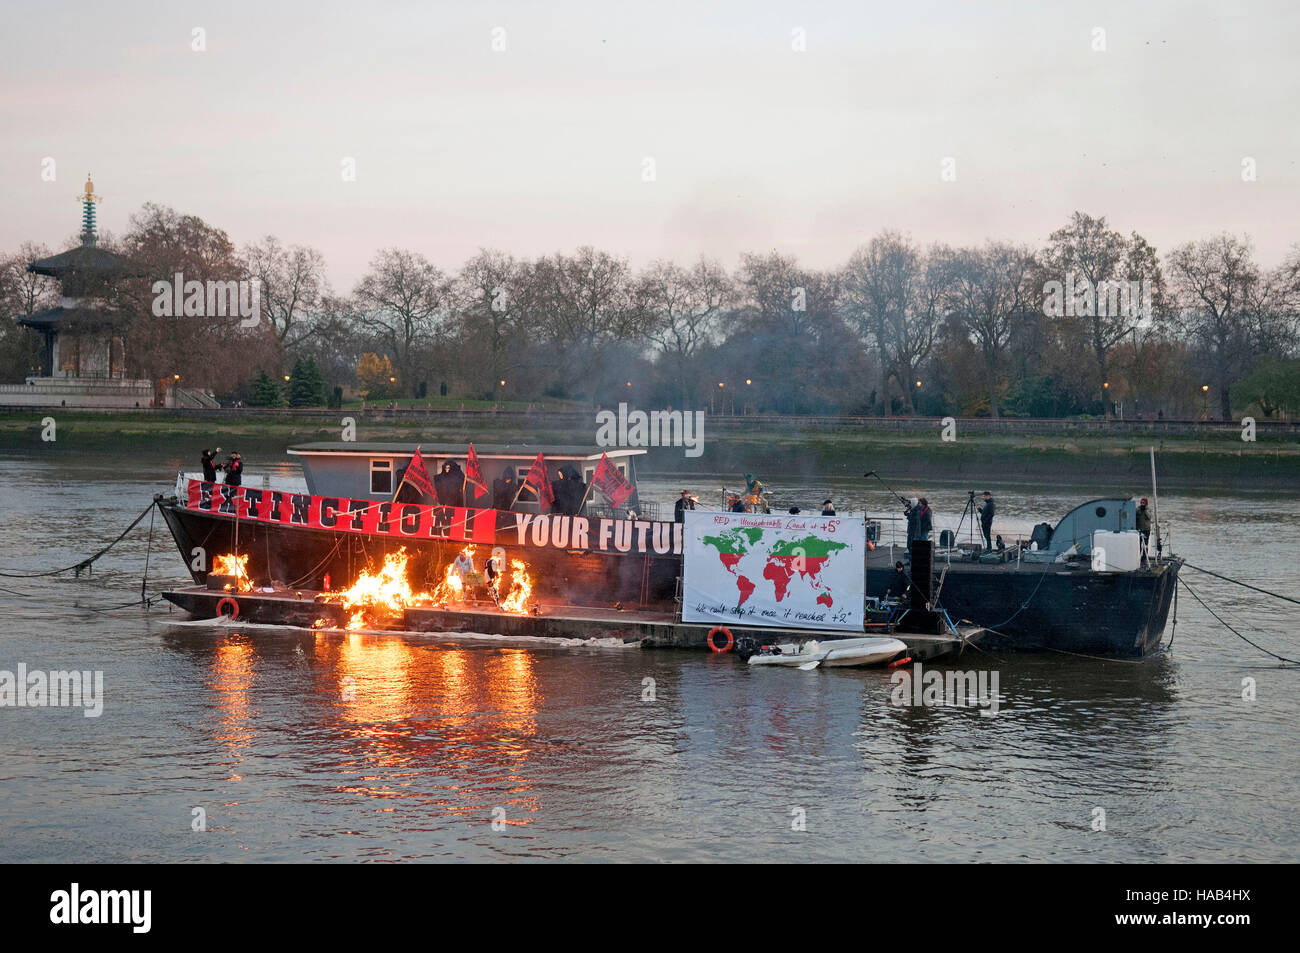 Joe Corre burns his £5 million pound collection of punk memorabilia in protest to declare 'punk is dead'. The burning took place on a barge on Chelsea Embankment. Stock Photo